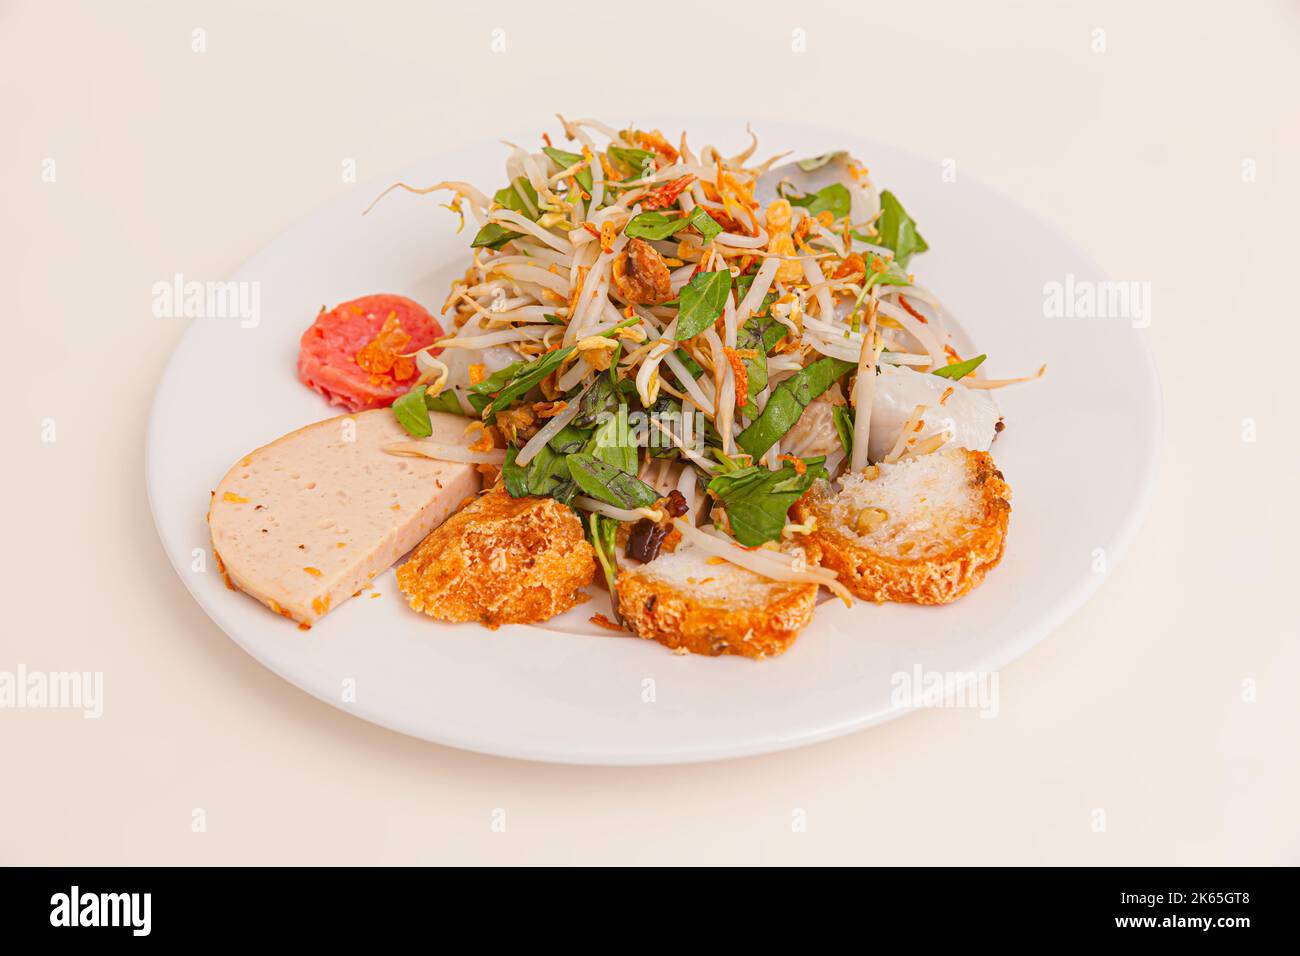 Banh Cuon, vietnamese steamed rice rolls with minced meat inside, Vietnamese food isolated on white background, close-up Stock Photo